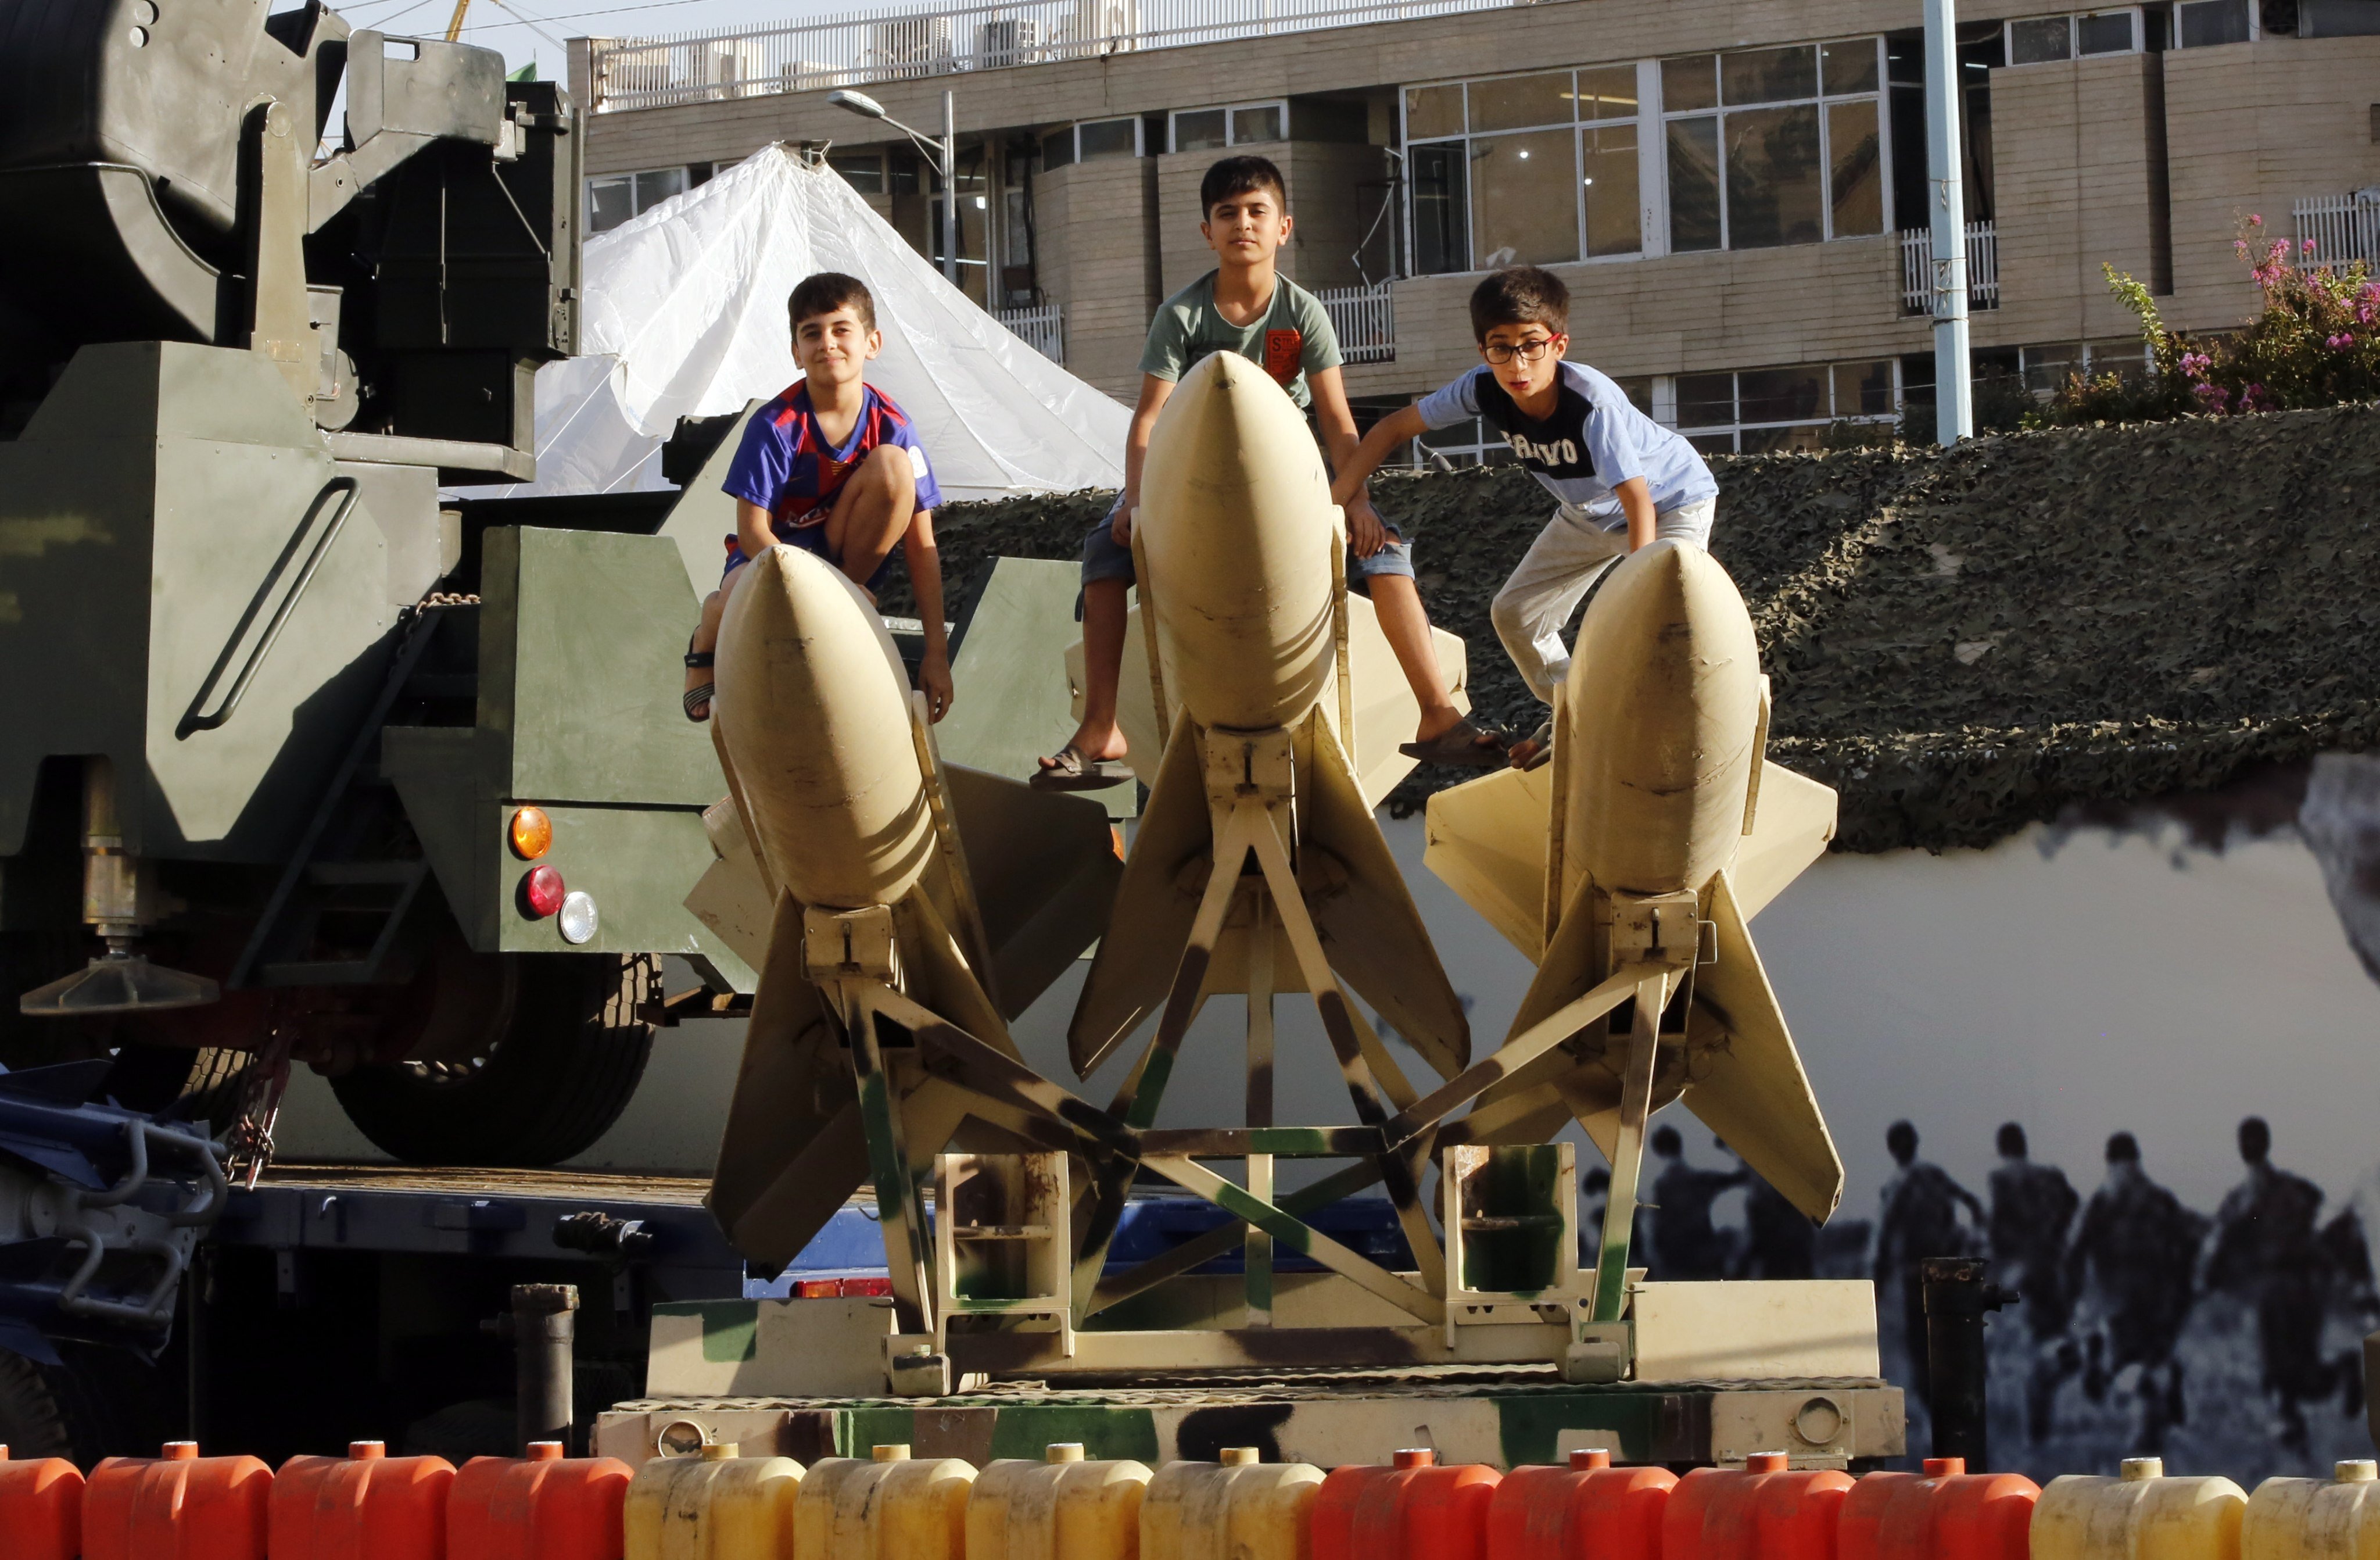 Iranian children sit on short-range missiles in a street exhibition celebrating “Defence Week” at the Baharestan Square in Tehran, Iran, on September 25. Iranian nuclear negotiations are set to resume on November 29. Photo: EPA-EFE